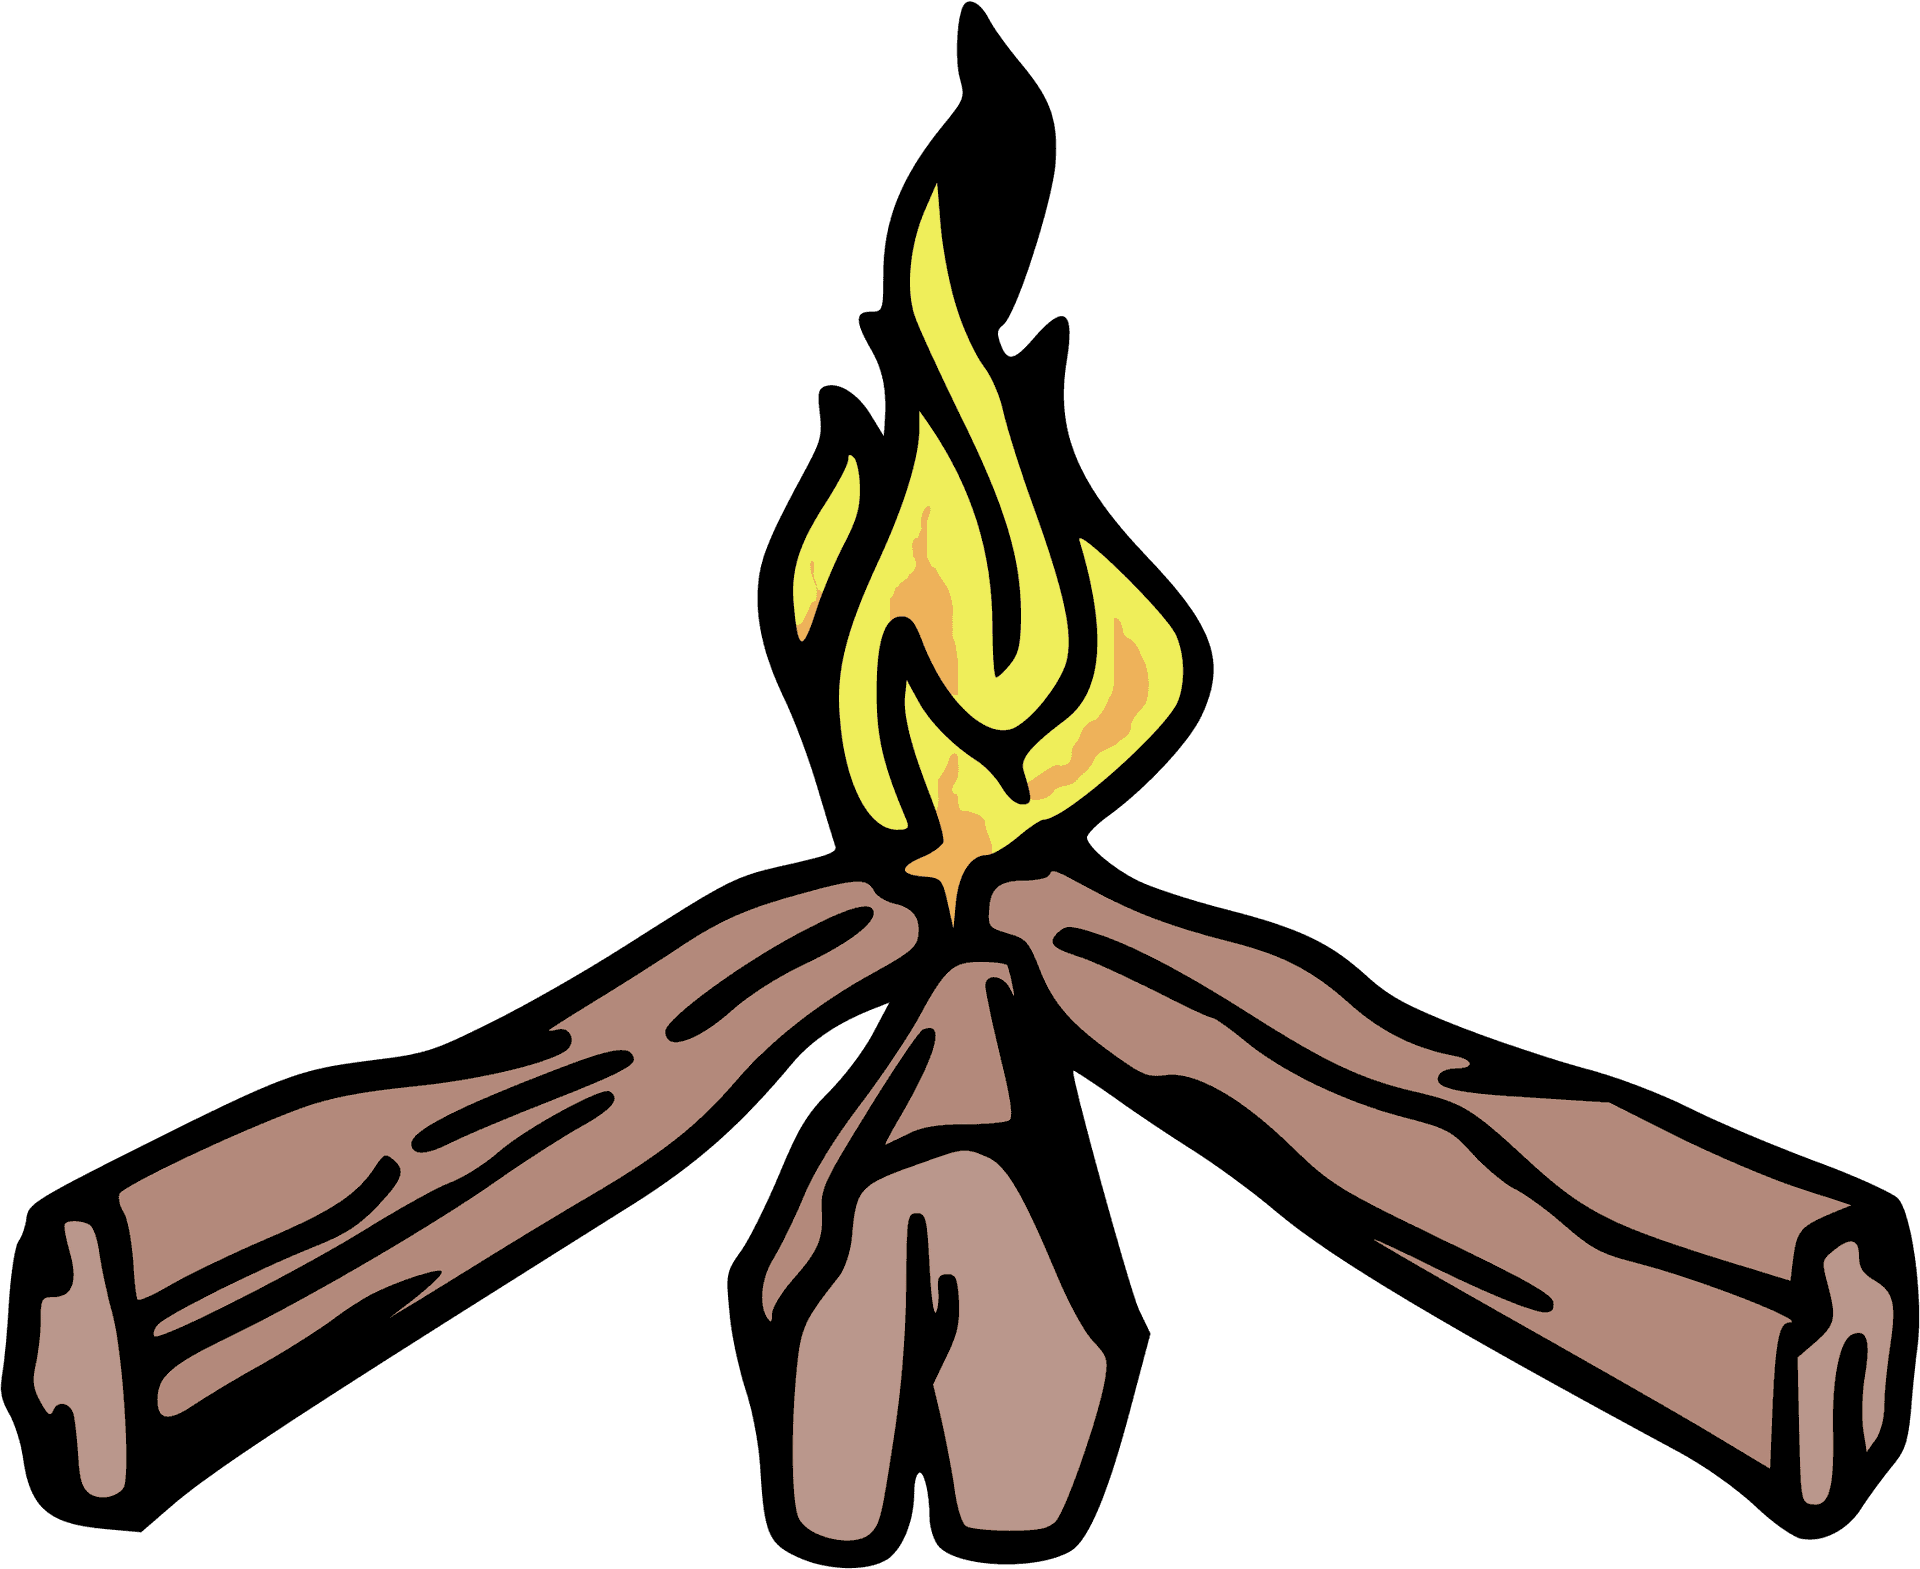 Stylized Campfire Illustration.png PNG